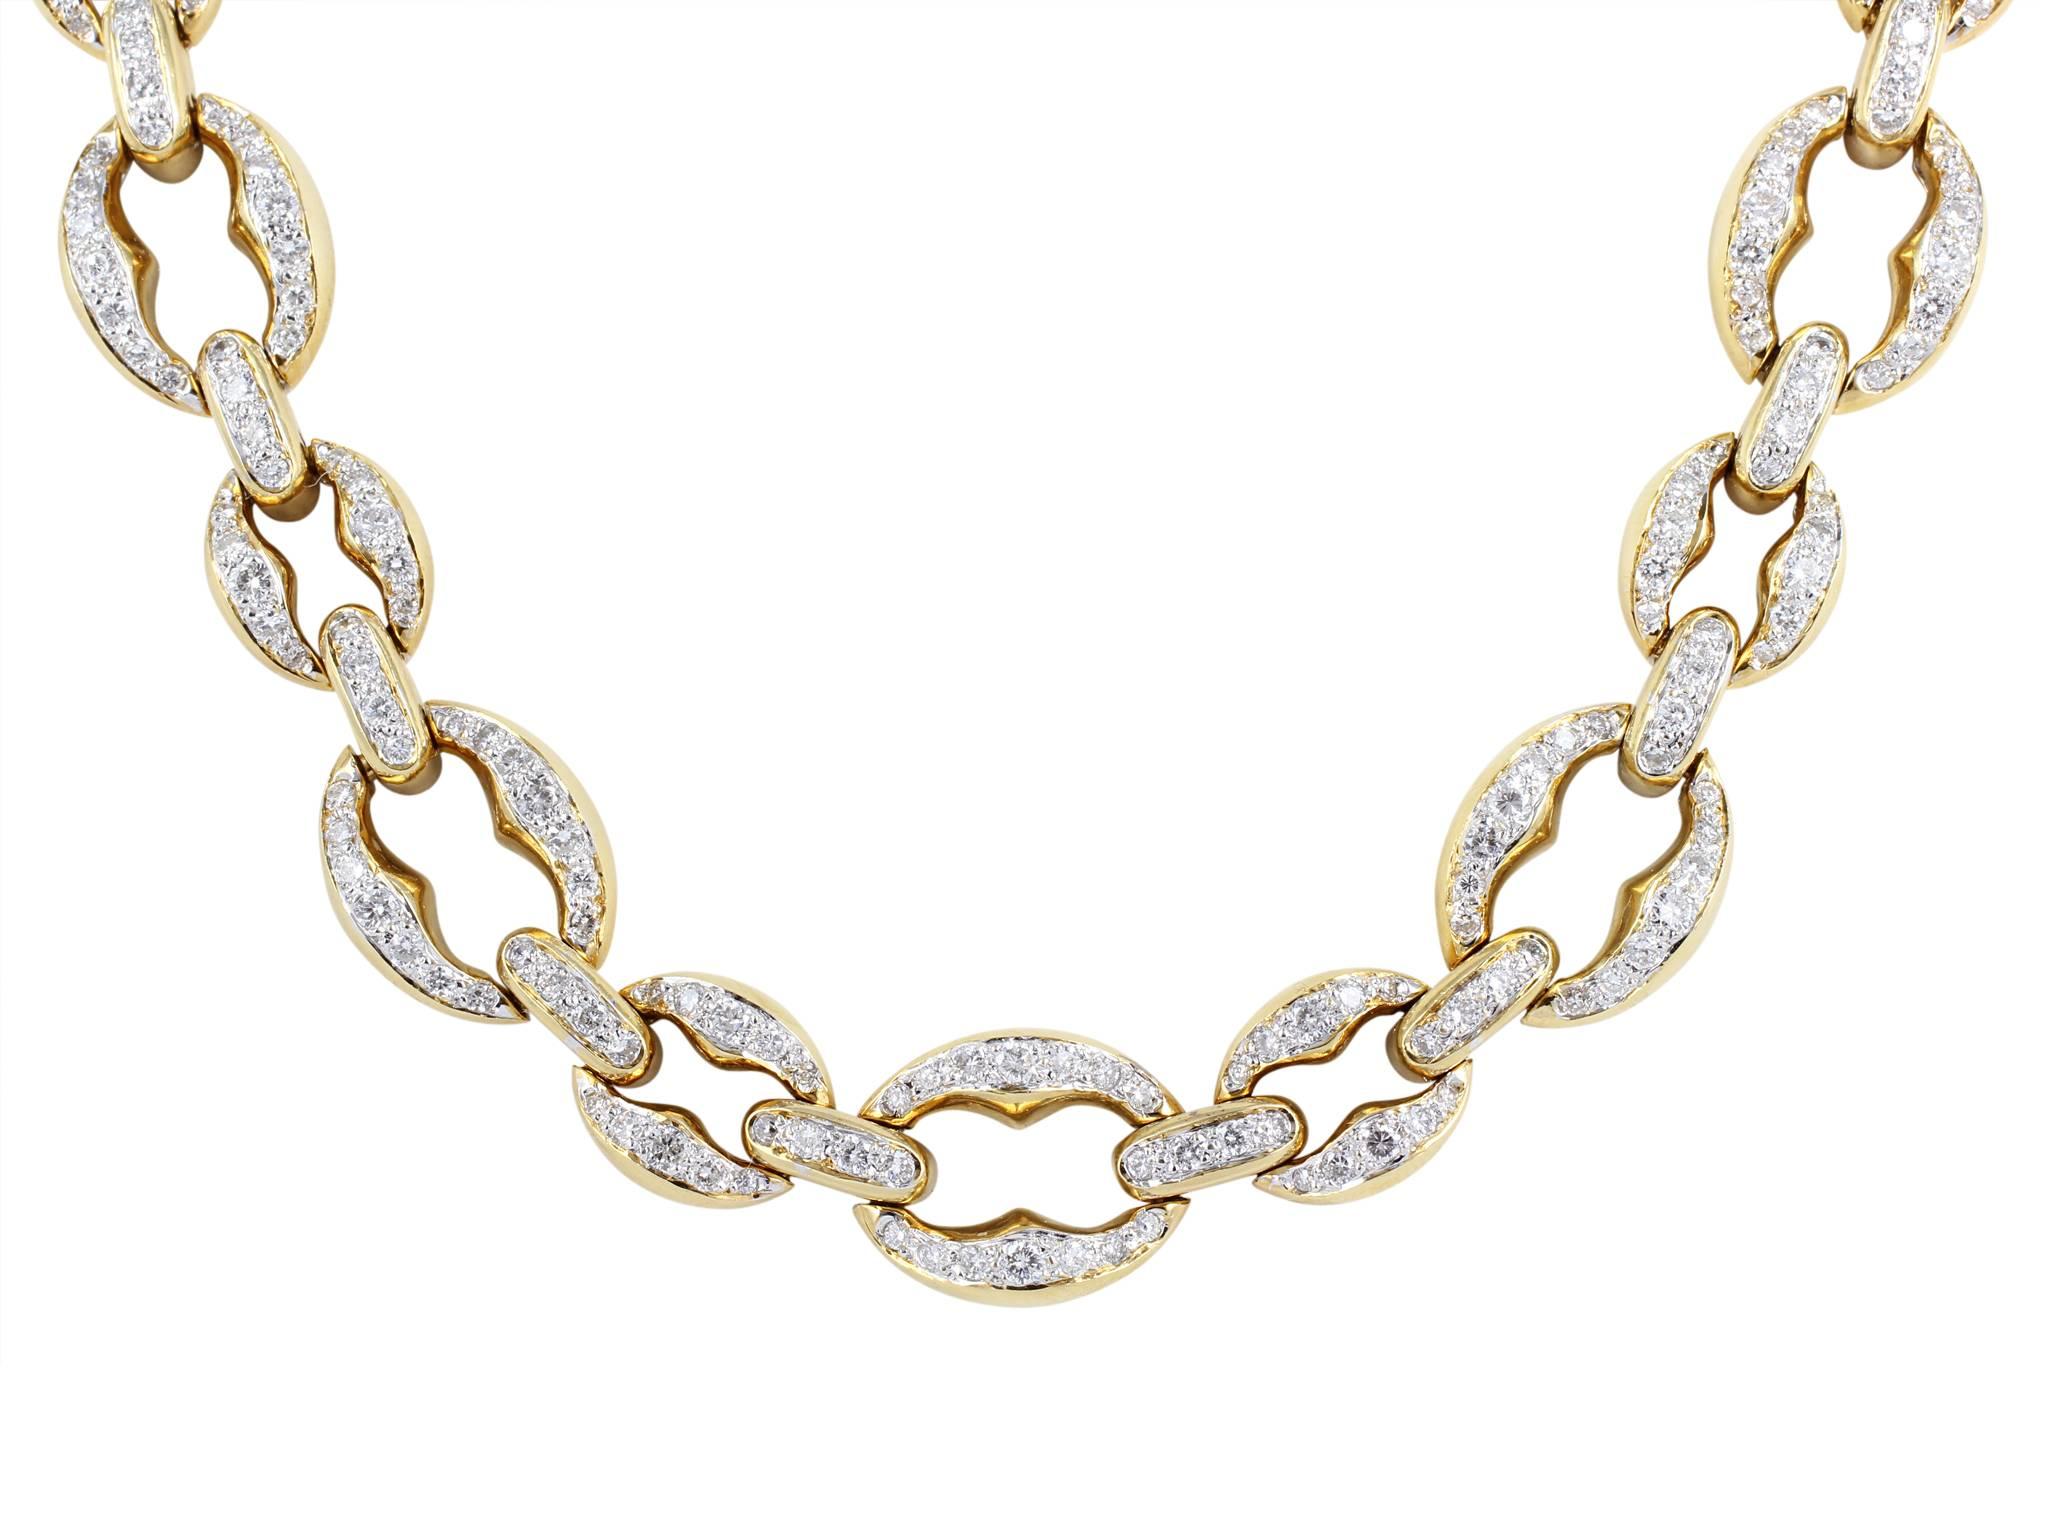 Estate 18 karat yellow gold link necklace consisting of 420 bead set round brilliant cut diamonds having an approximate total weight of 13.50 carats and weighing 69.9 dwt.